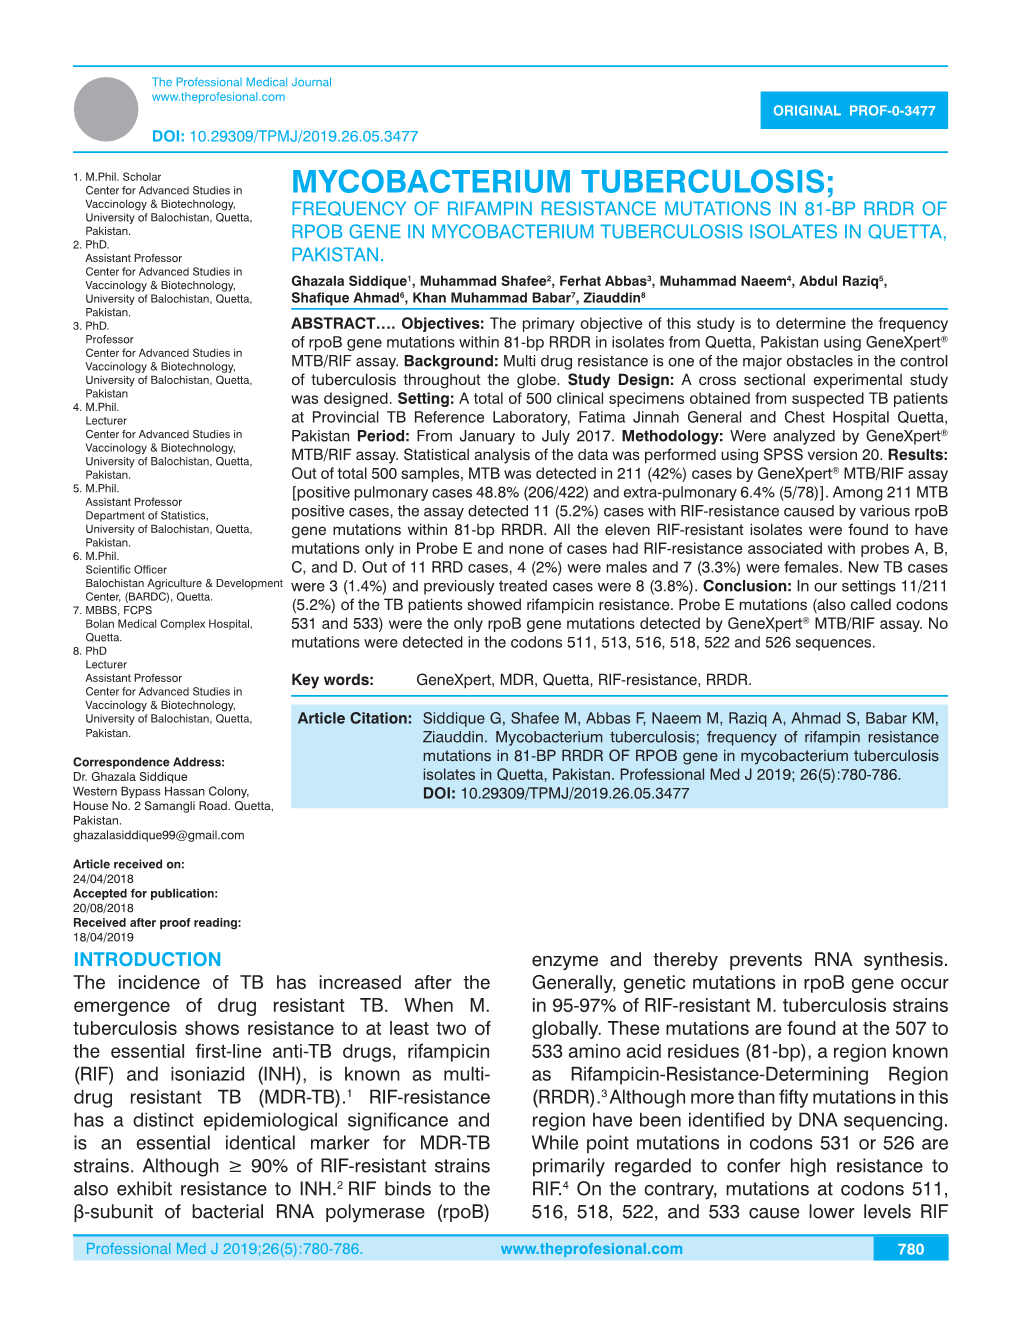 MYCOBACTERIUM TUBERCULOSIS; Vaccinology & Biotechnology, University of Balochistan, Quetta, FREQUENCY of RIFAMPIN RESISTANCE MUTATIONS in 81-BP RRDR of Pakistan